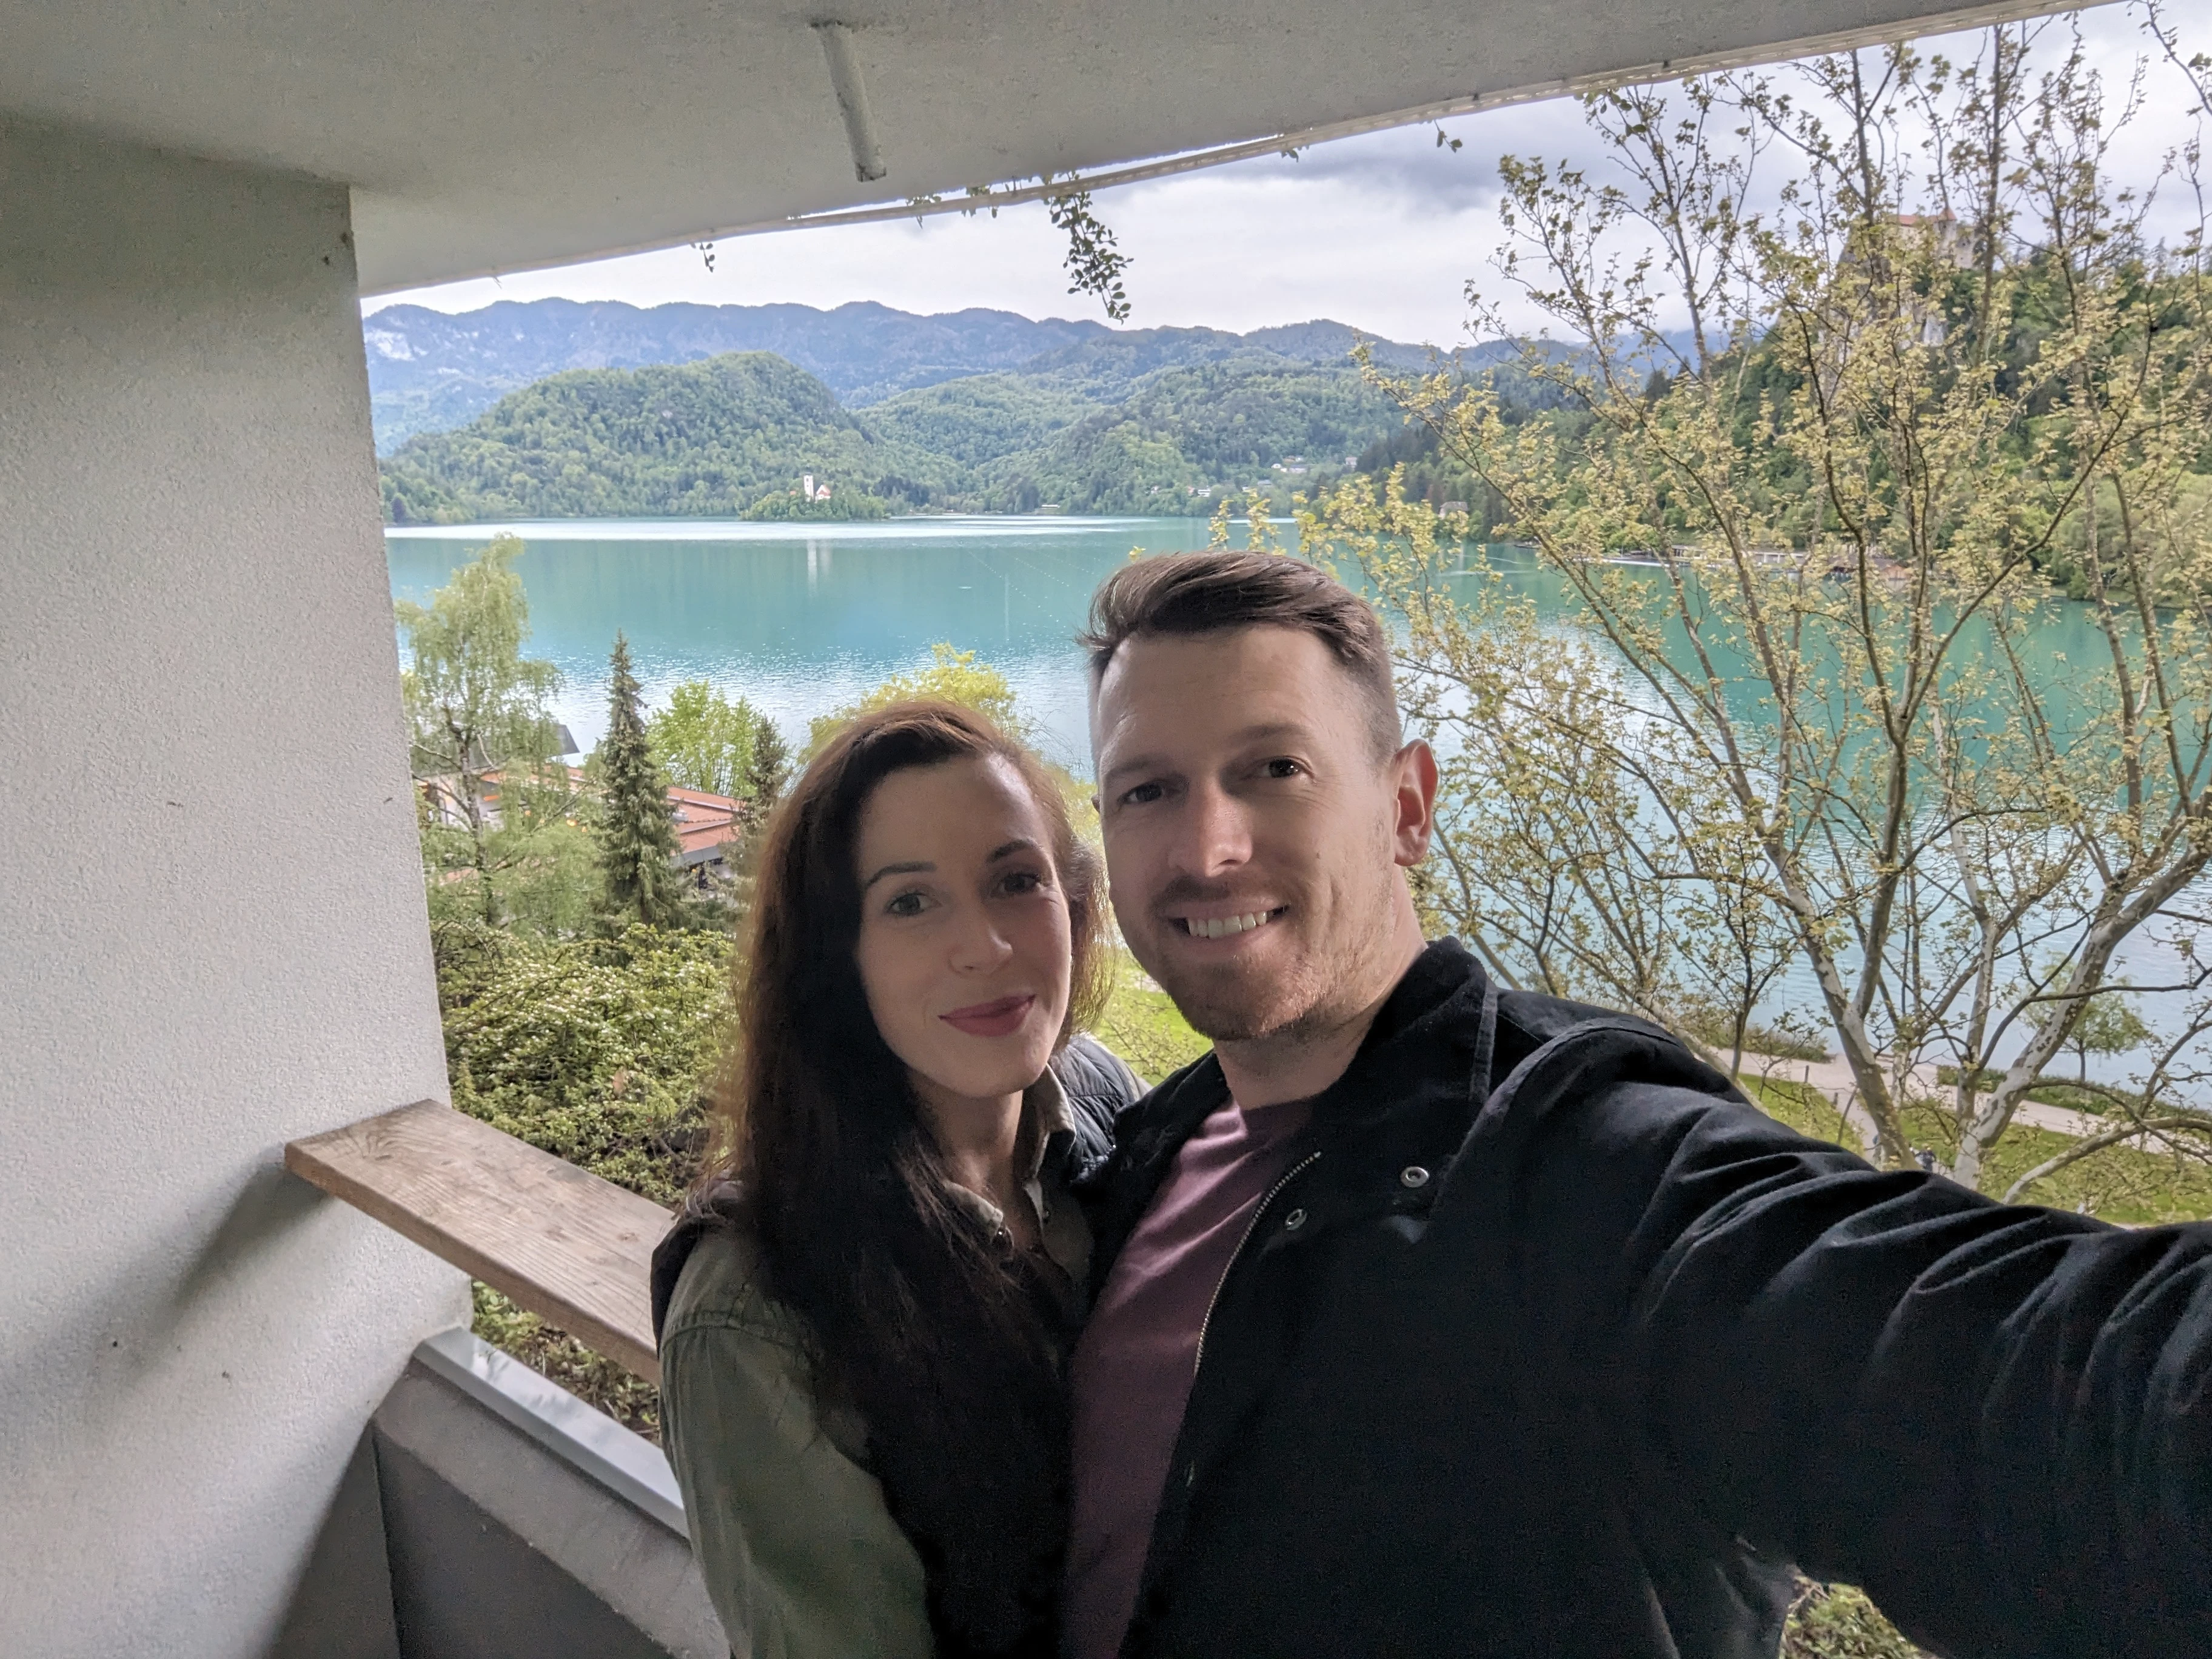 Hotel view of Lake Bled